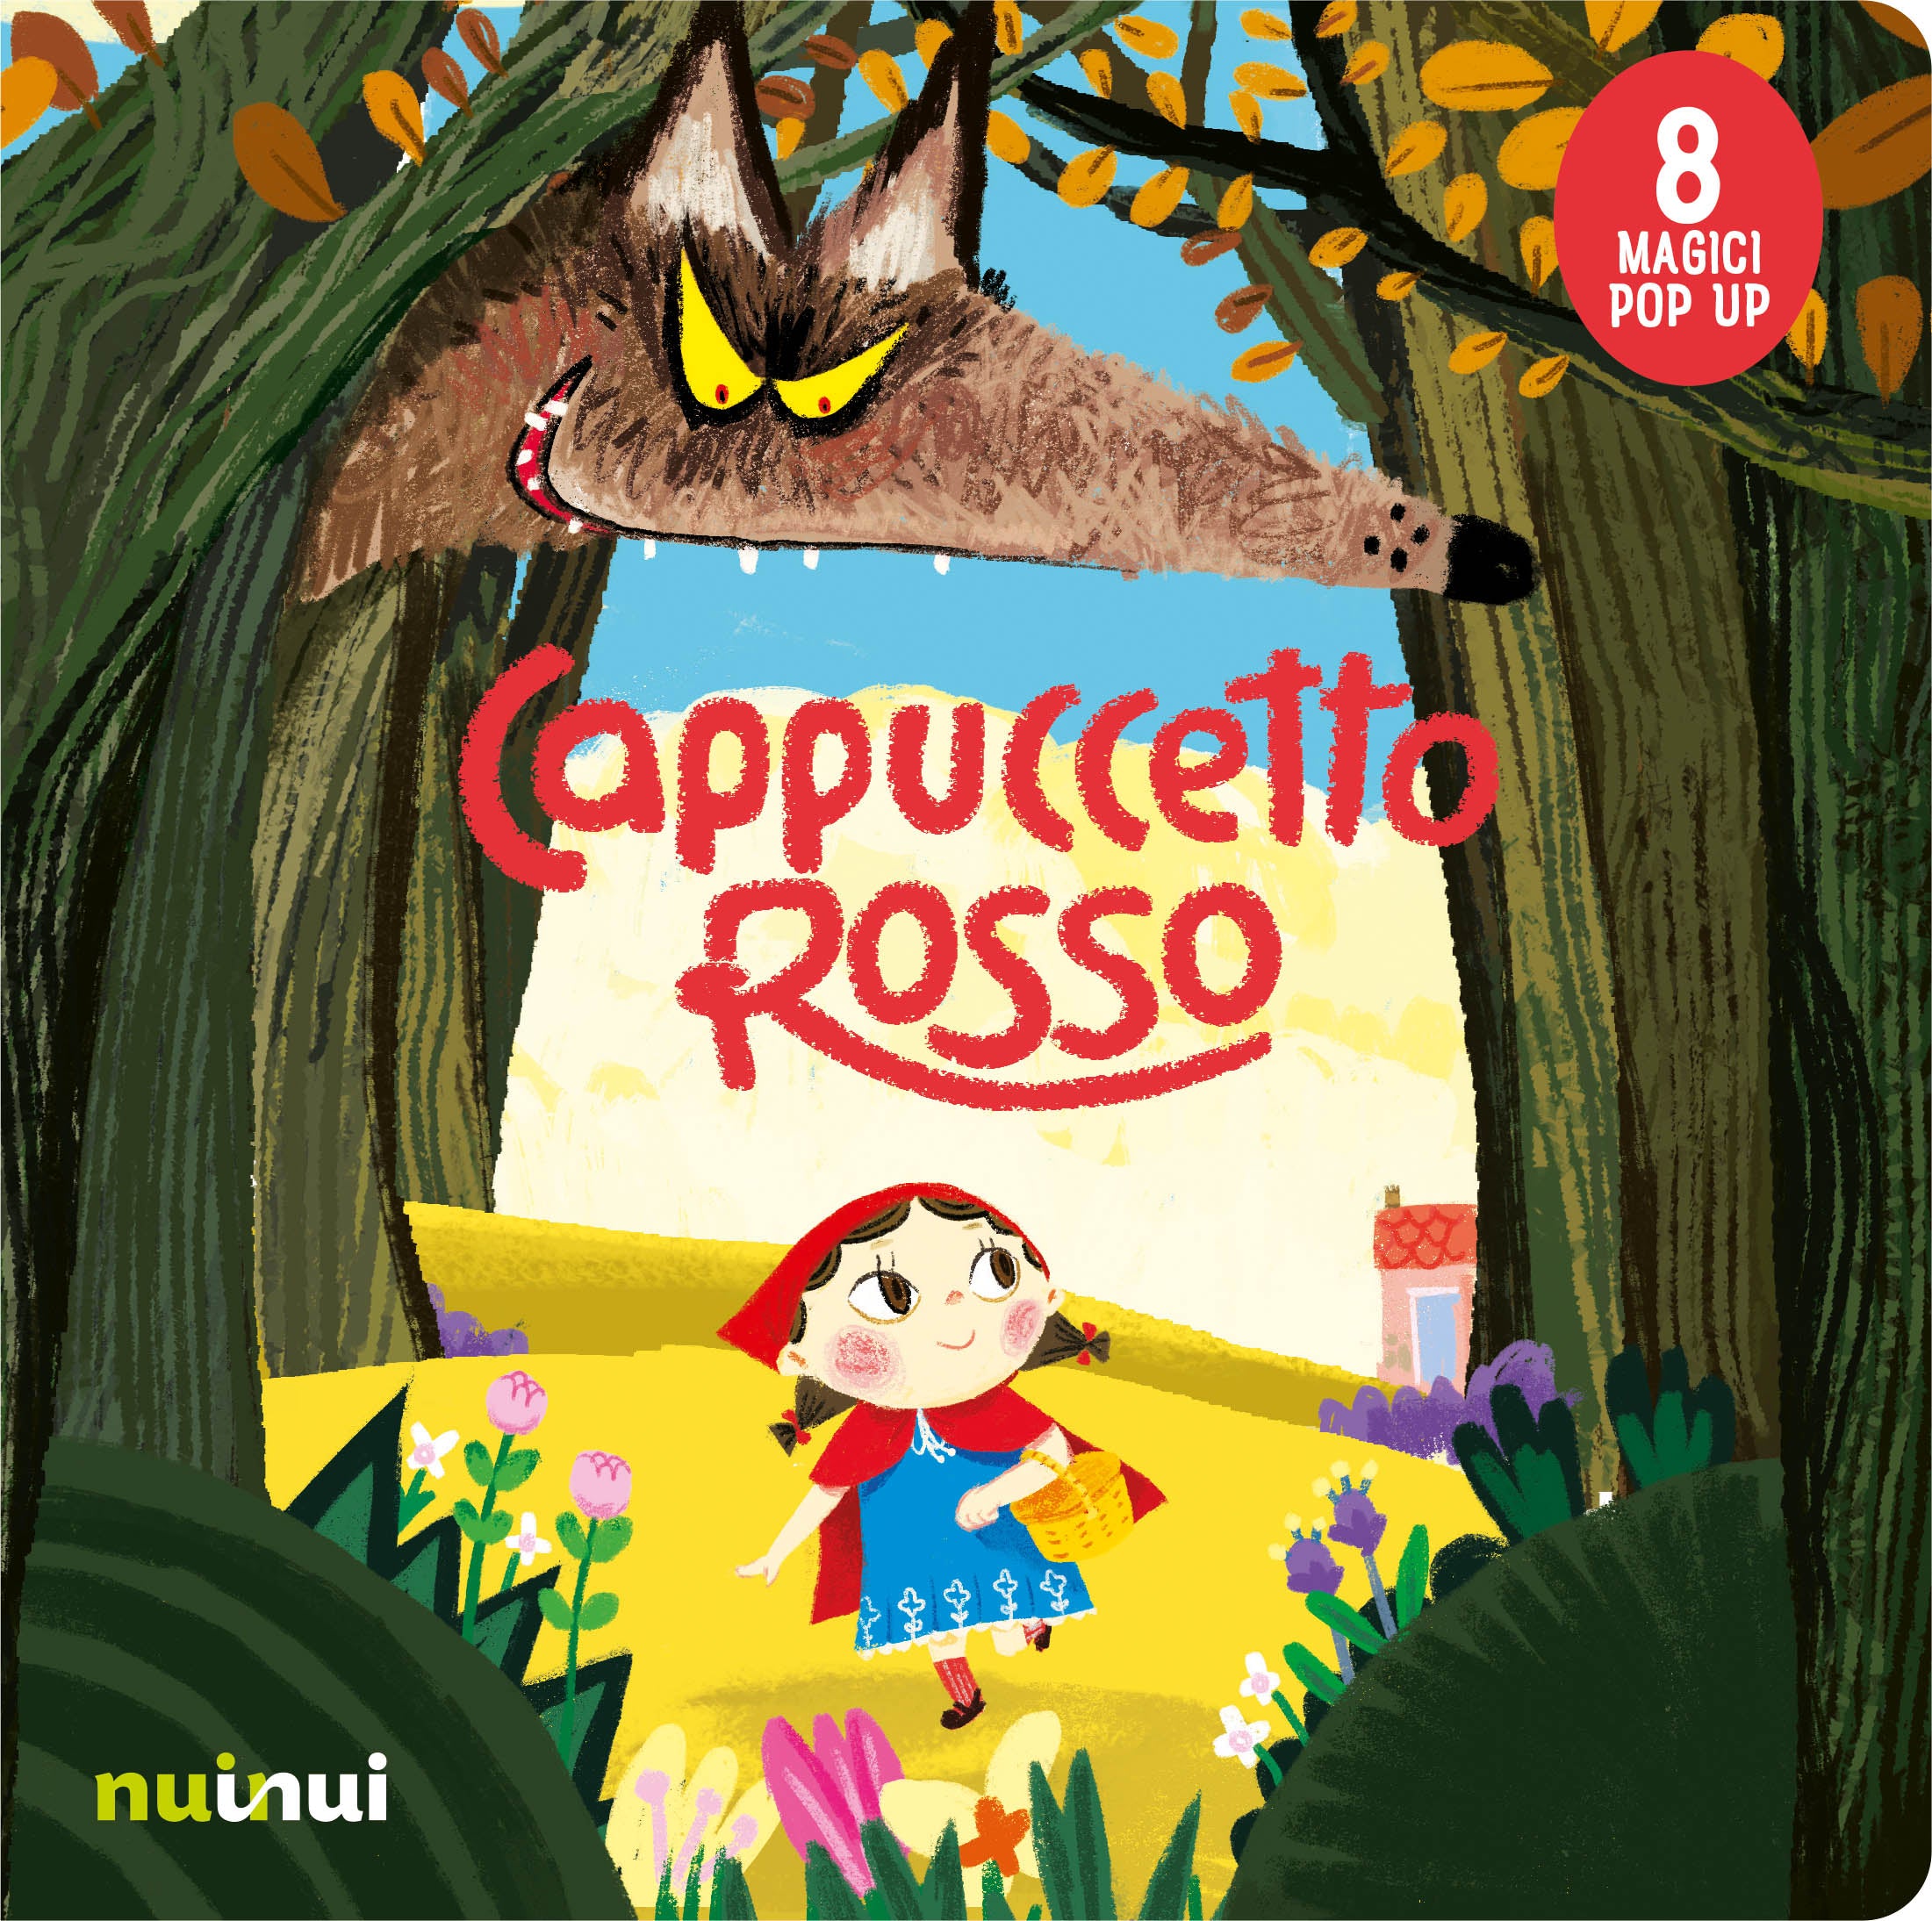 Fiabe pop up - Cappuccetto Rosso – NuiNui